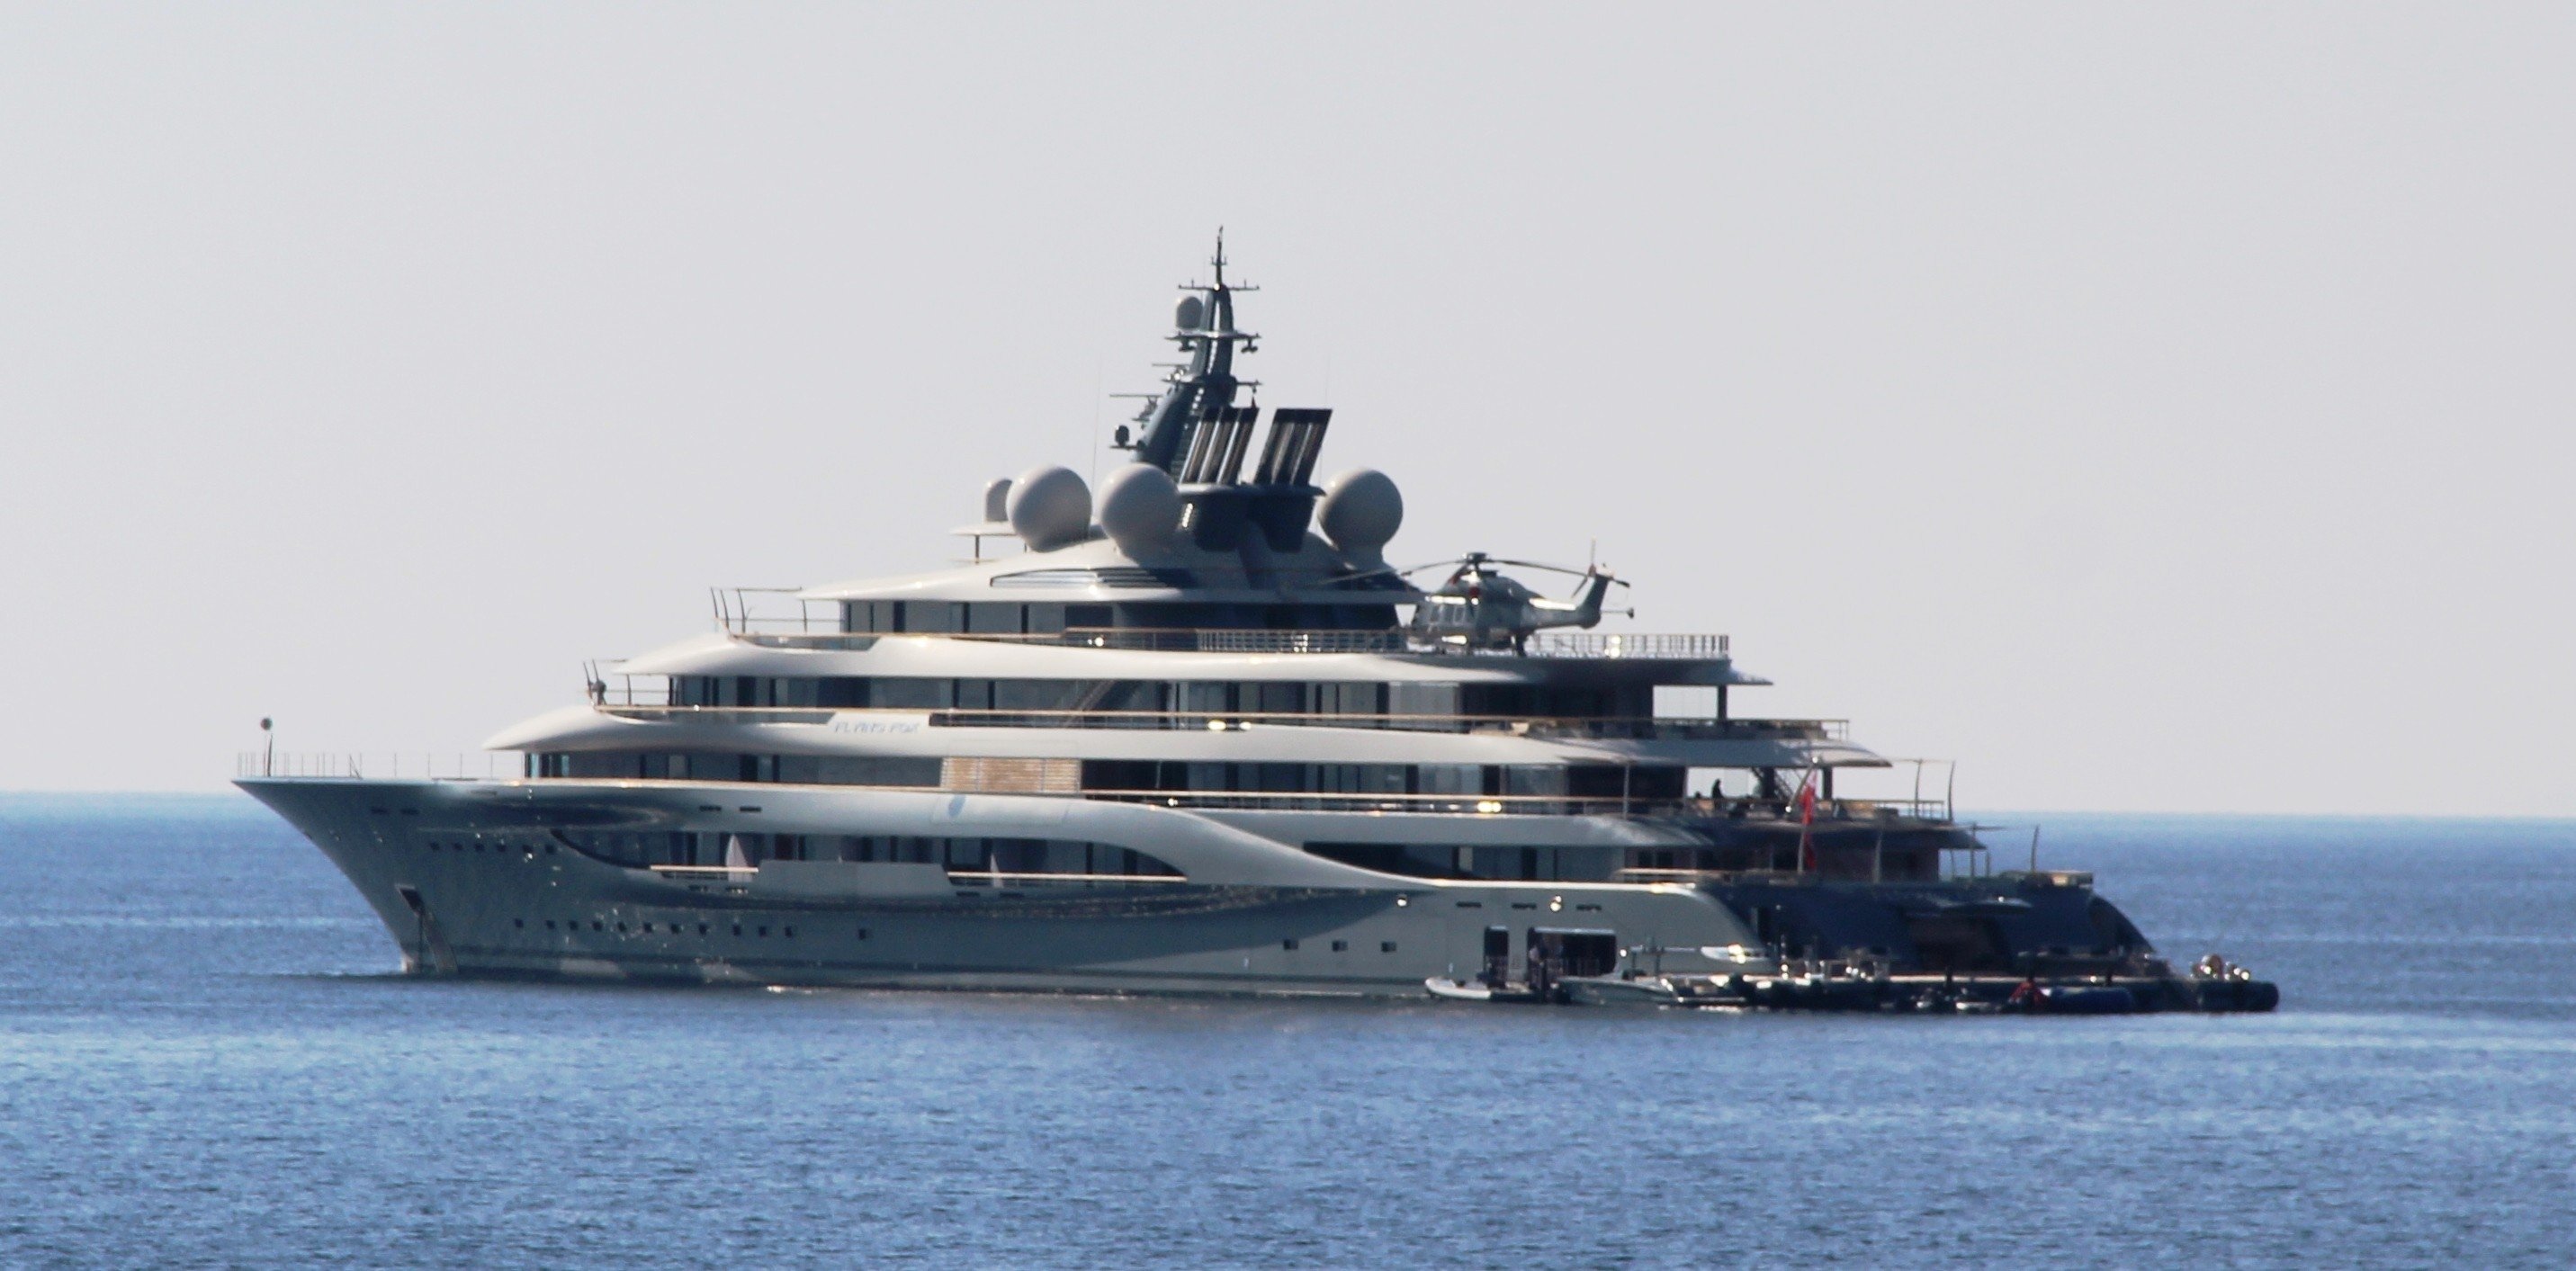 One of the largest luxury yachts in the world, "Flying Fox" can be seen anchored in a bay. (IHA Photo)